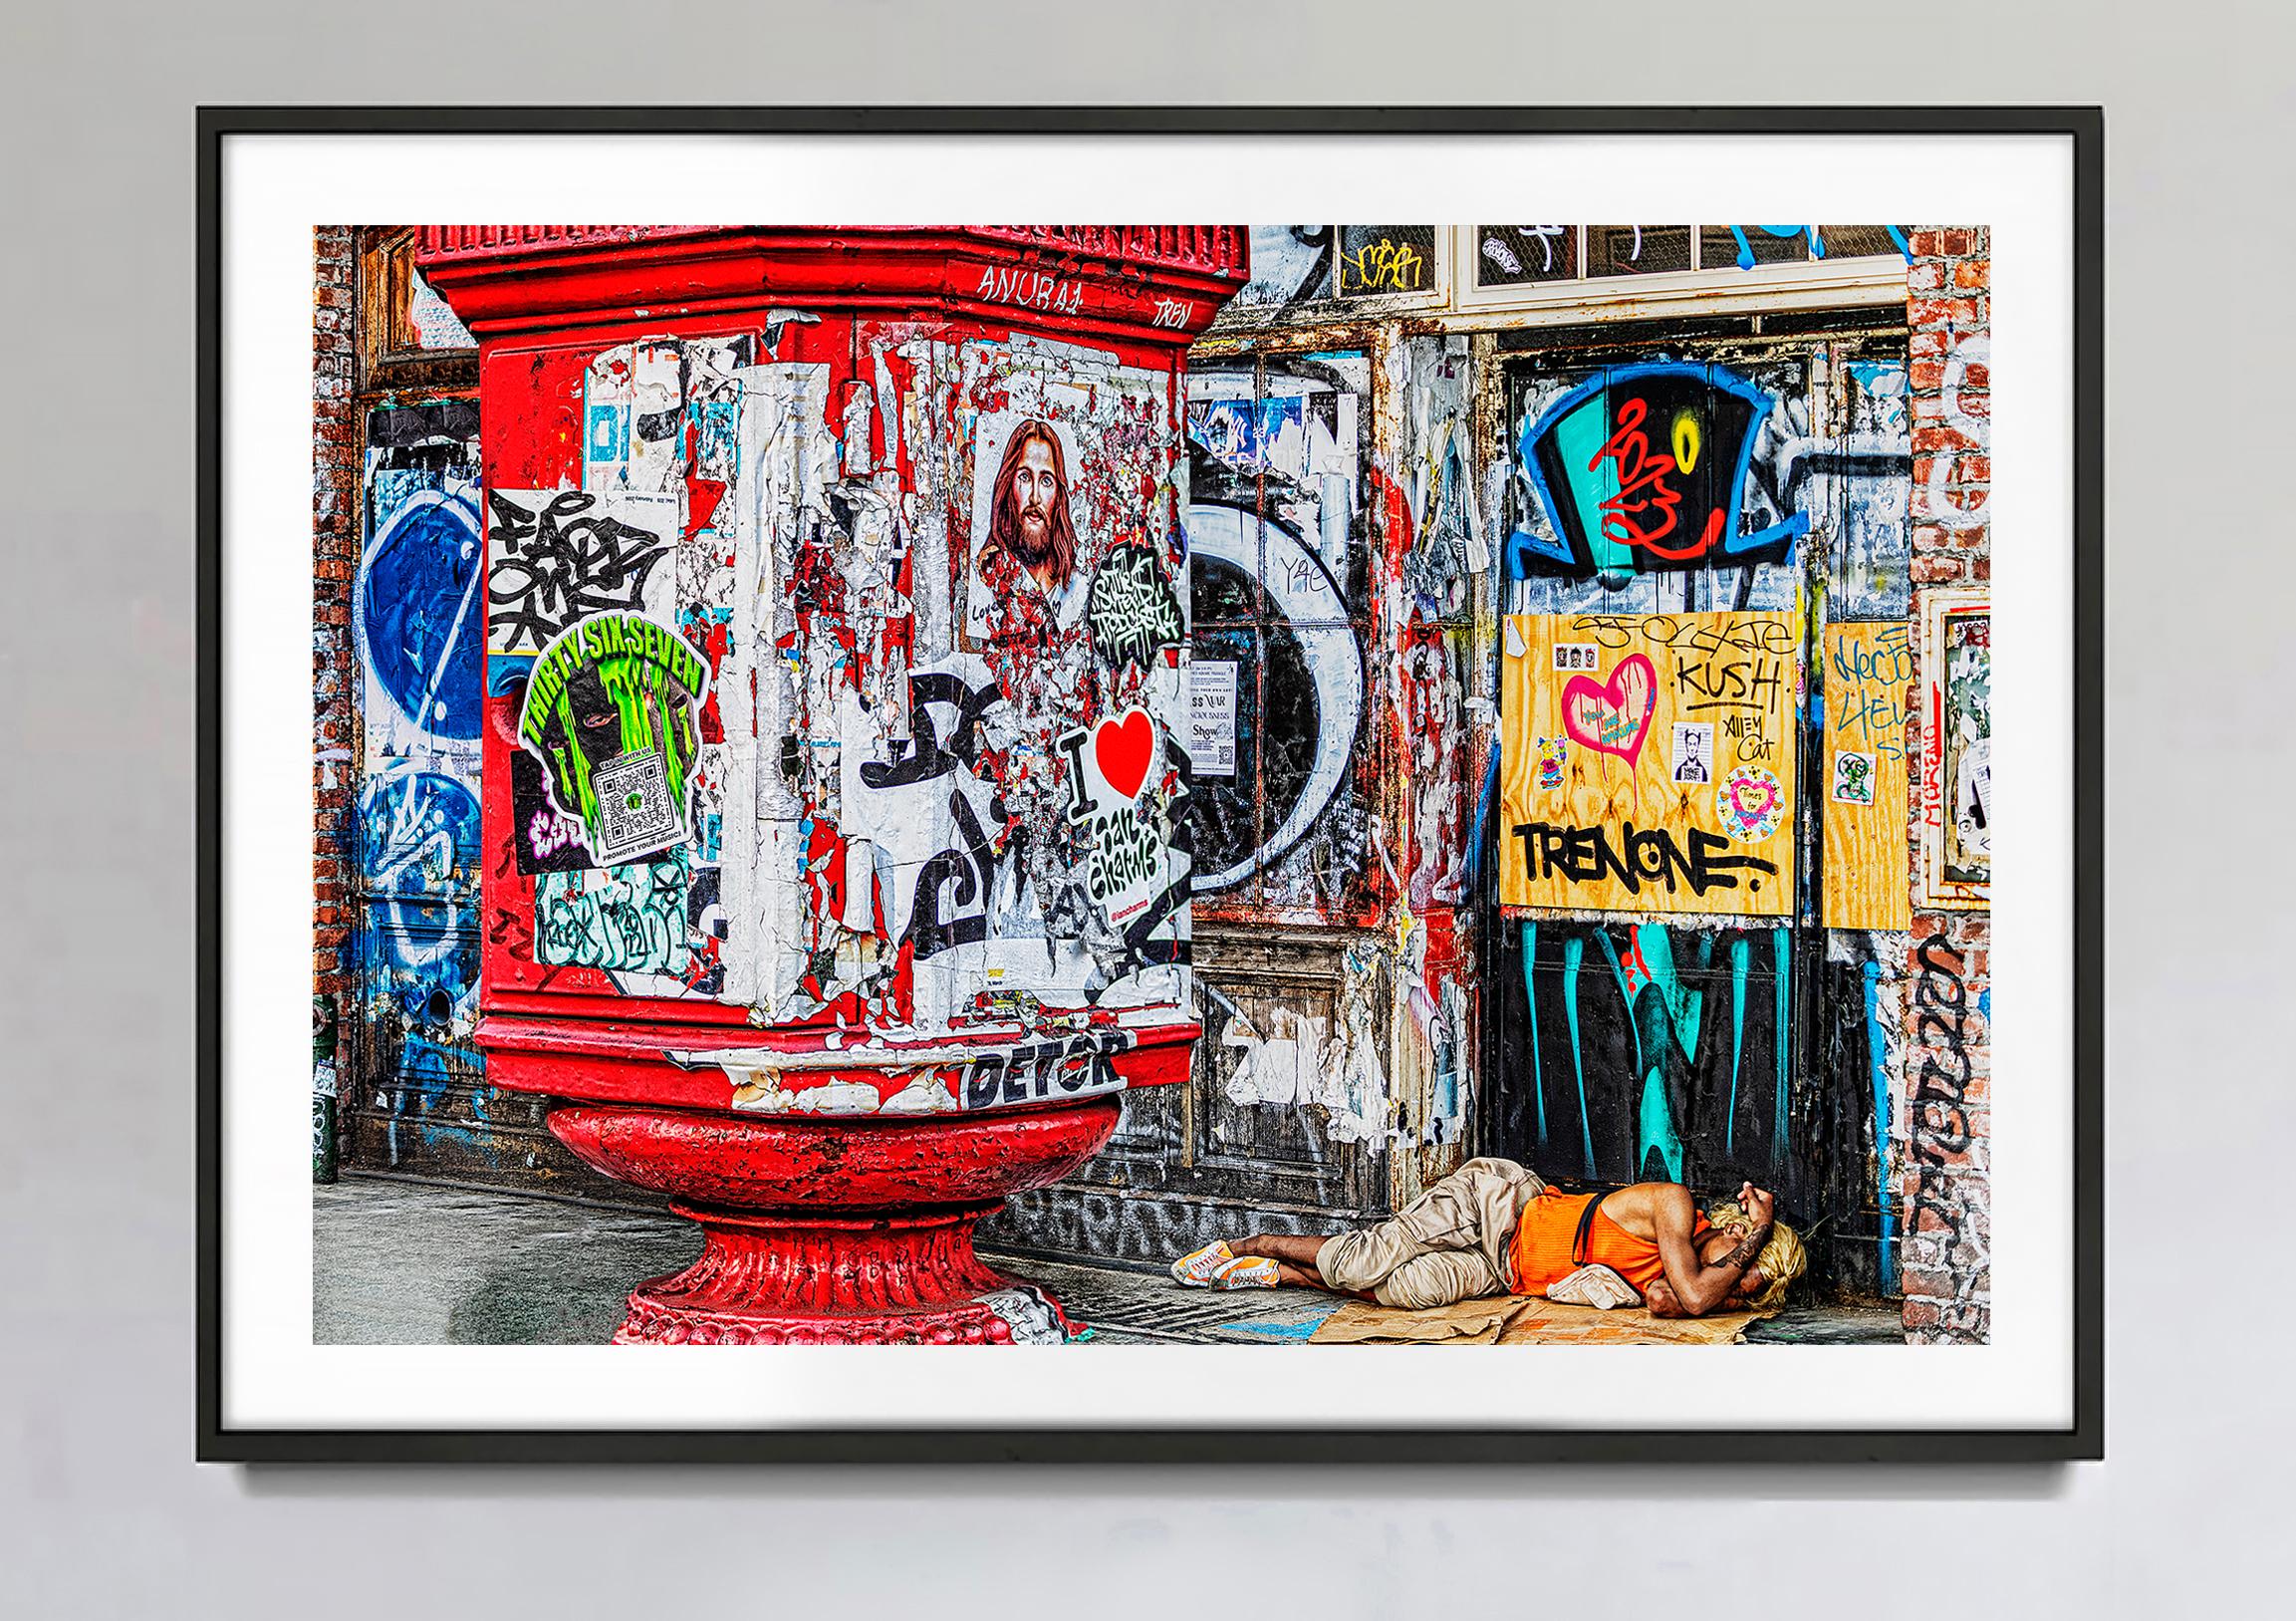 Bowery Street Scene with Abstract Graffiti - Photograph by Mitchell Funk